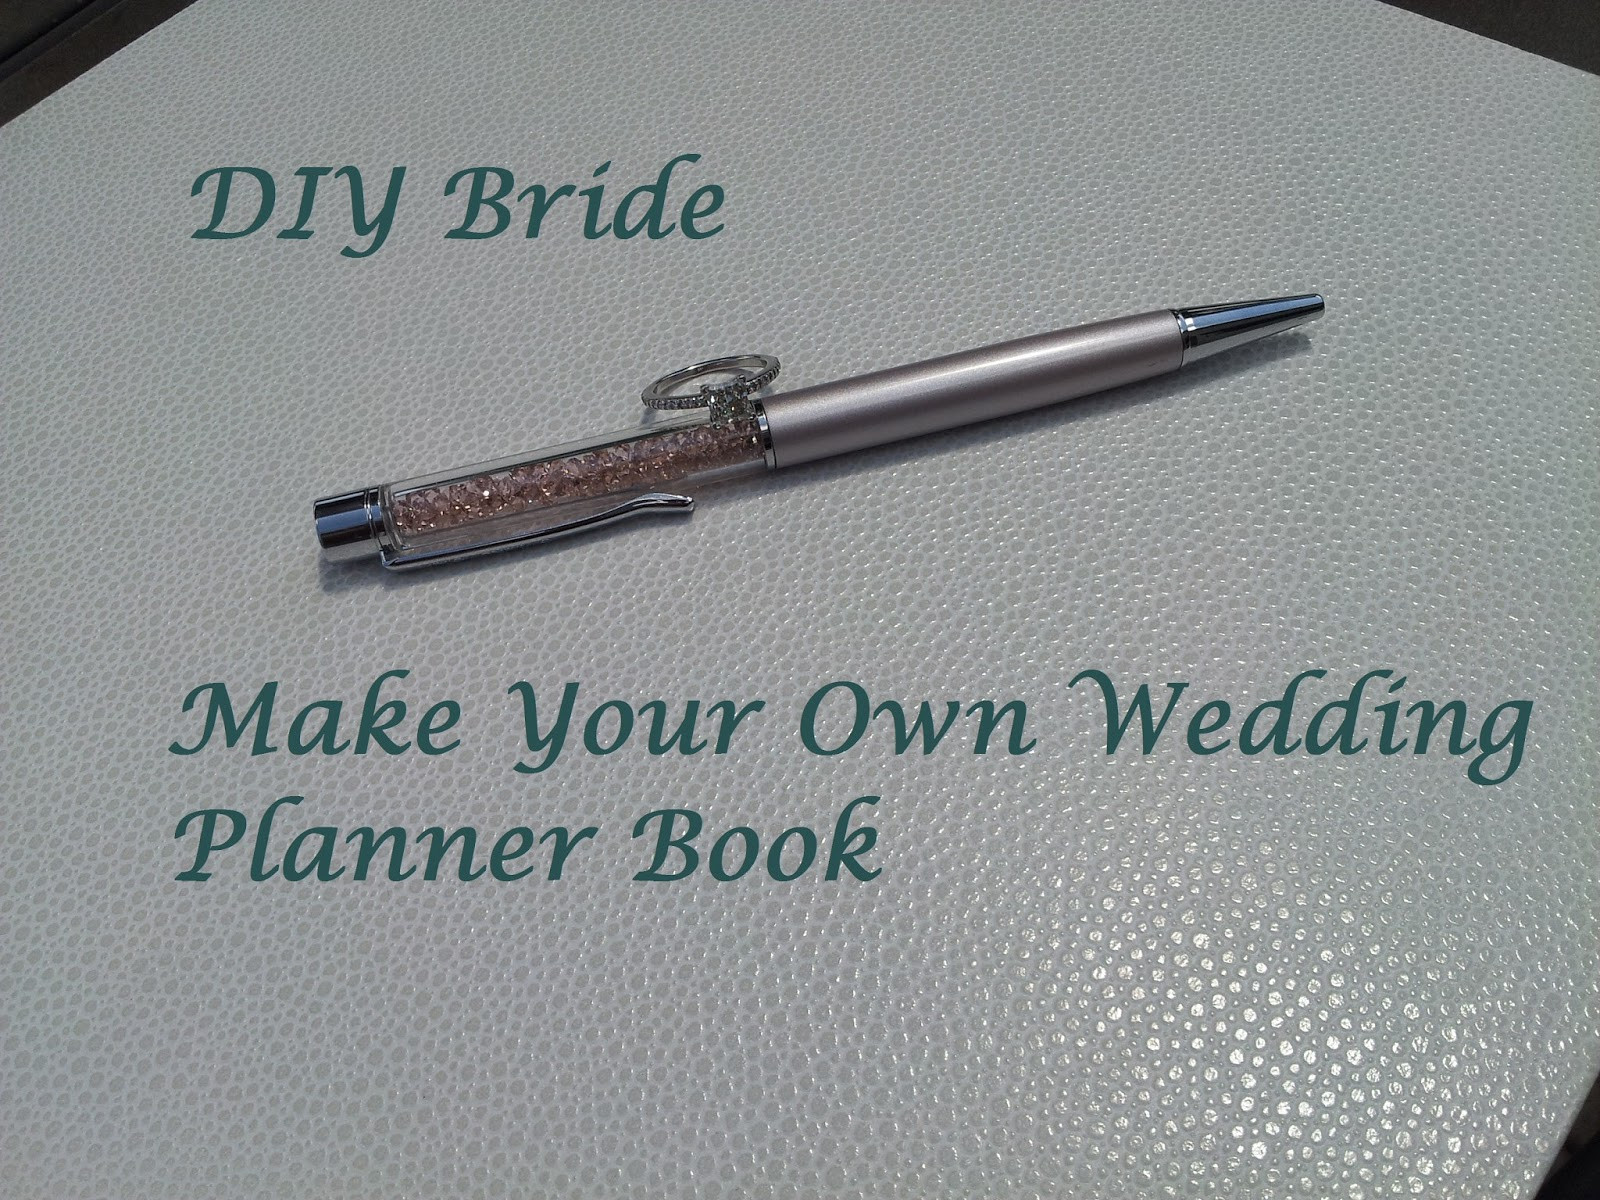 DIY Wedding Planner Book
 Sleepless in DIY Bride Country How to make your own